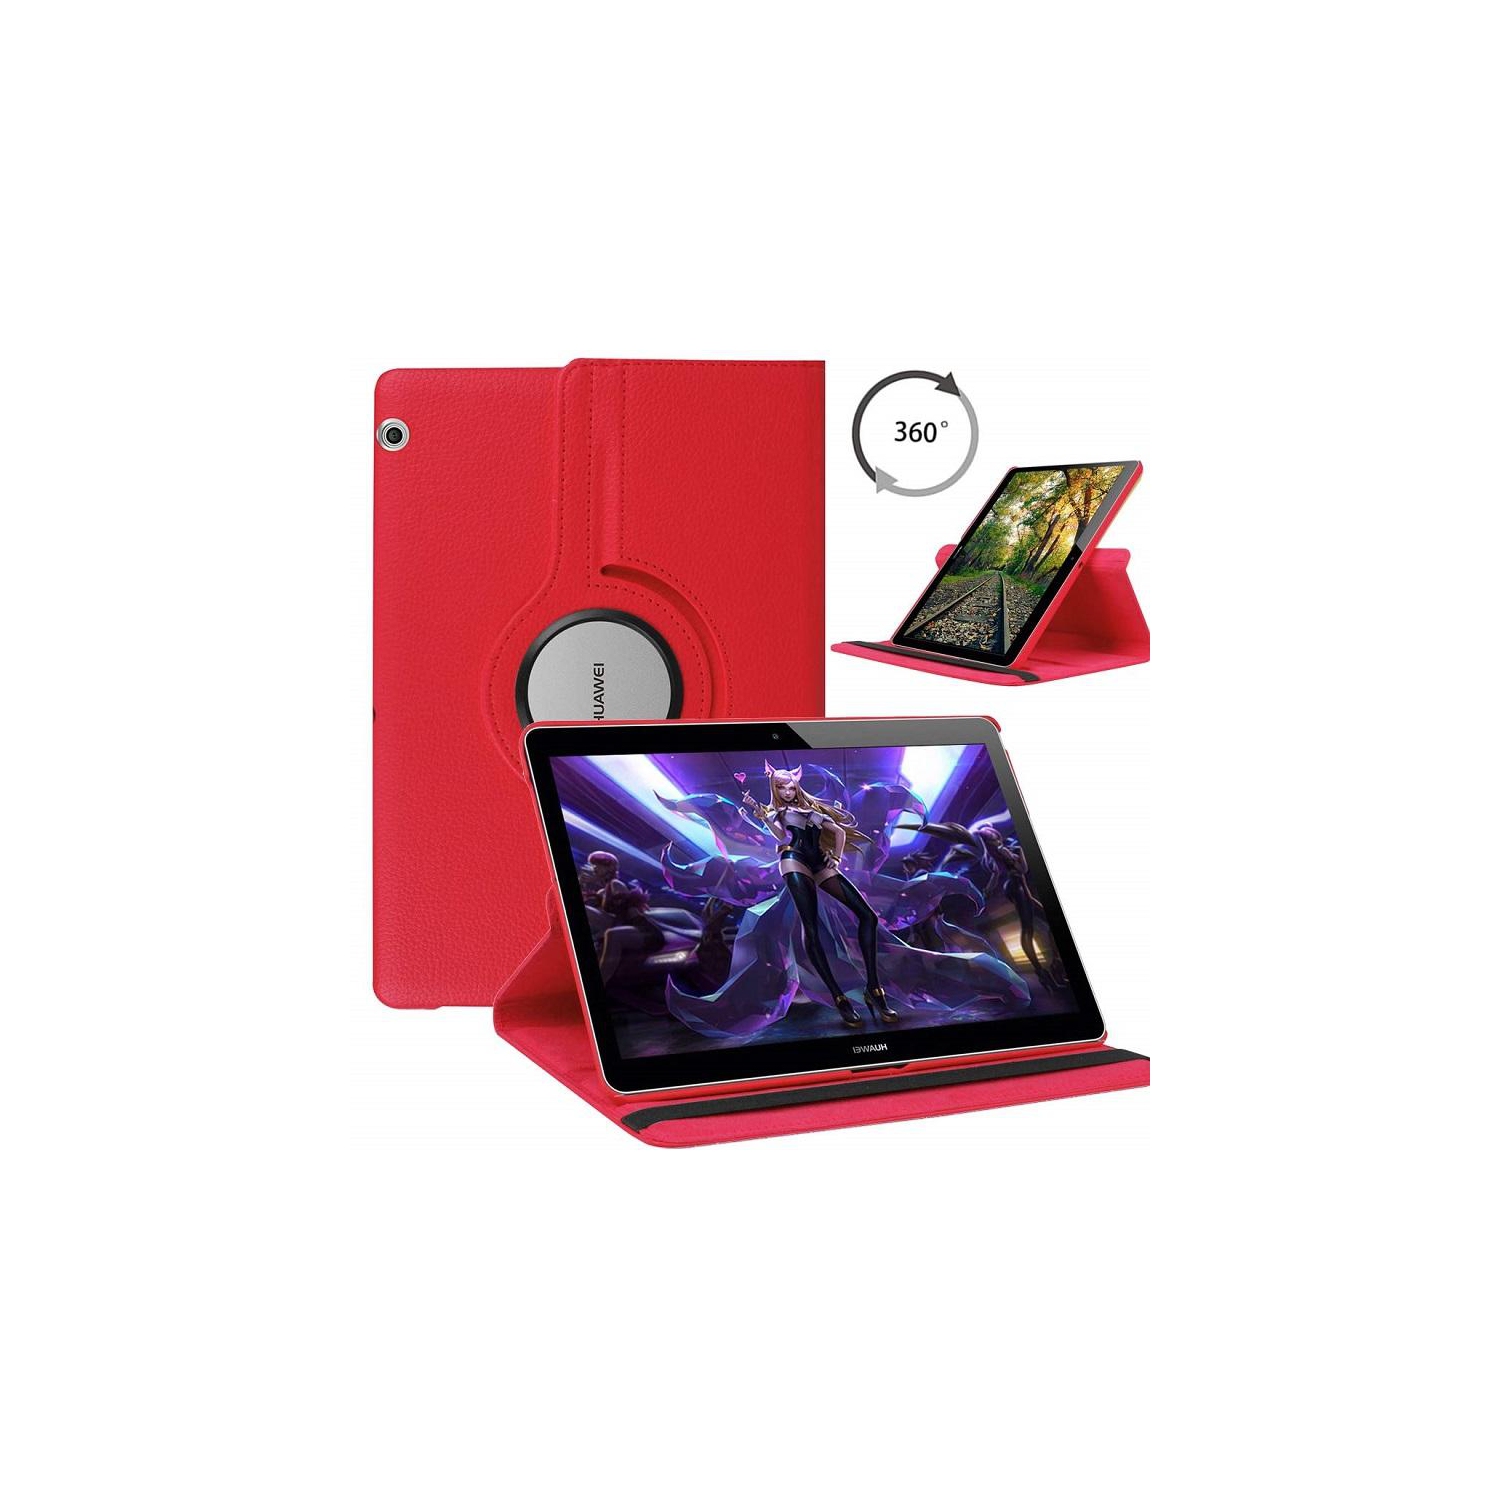 [CC] 360 Degree Rotating Tablet Case Cover For Huawei MediaPad T5, Red